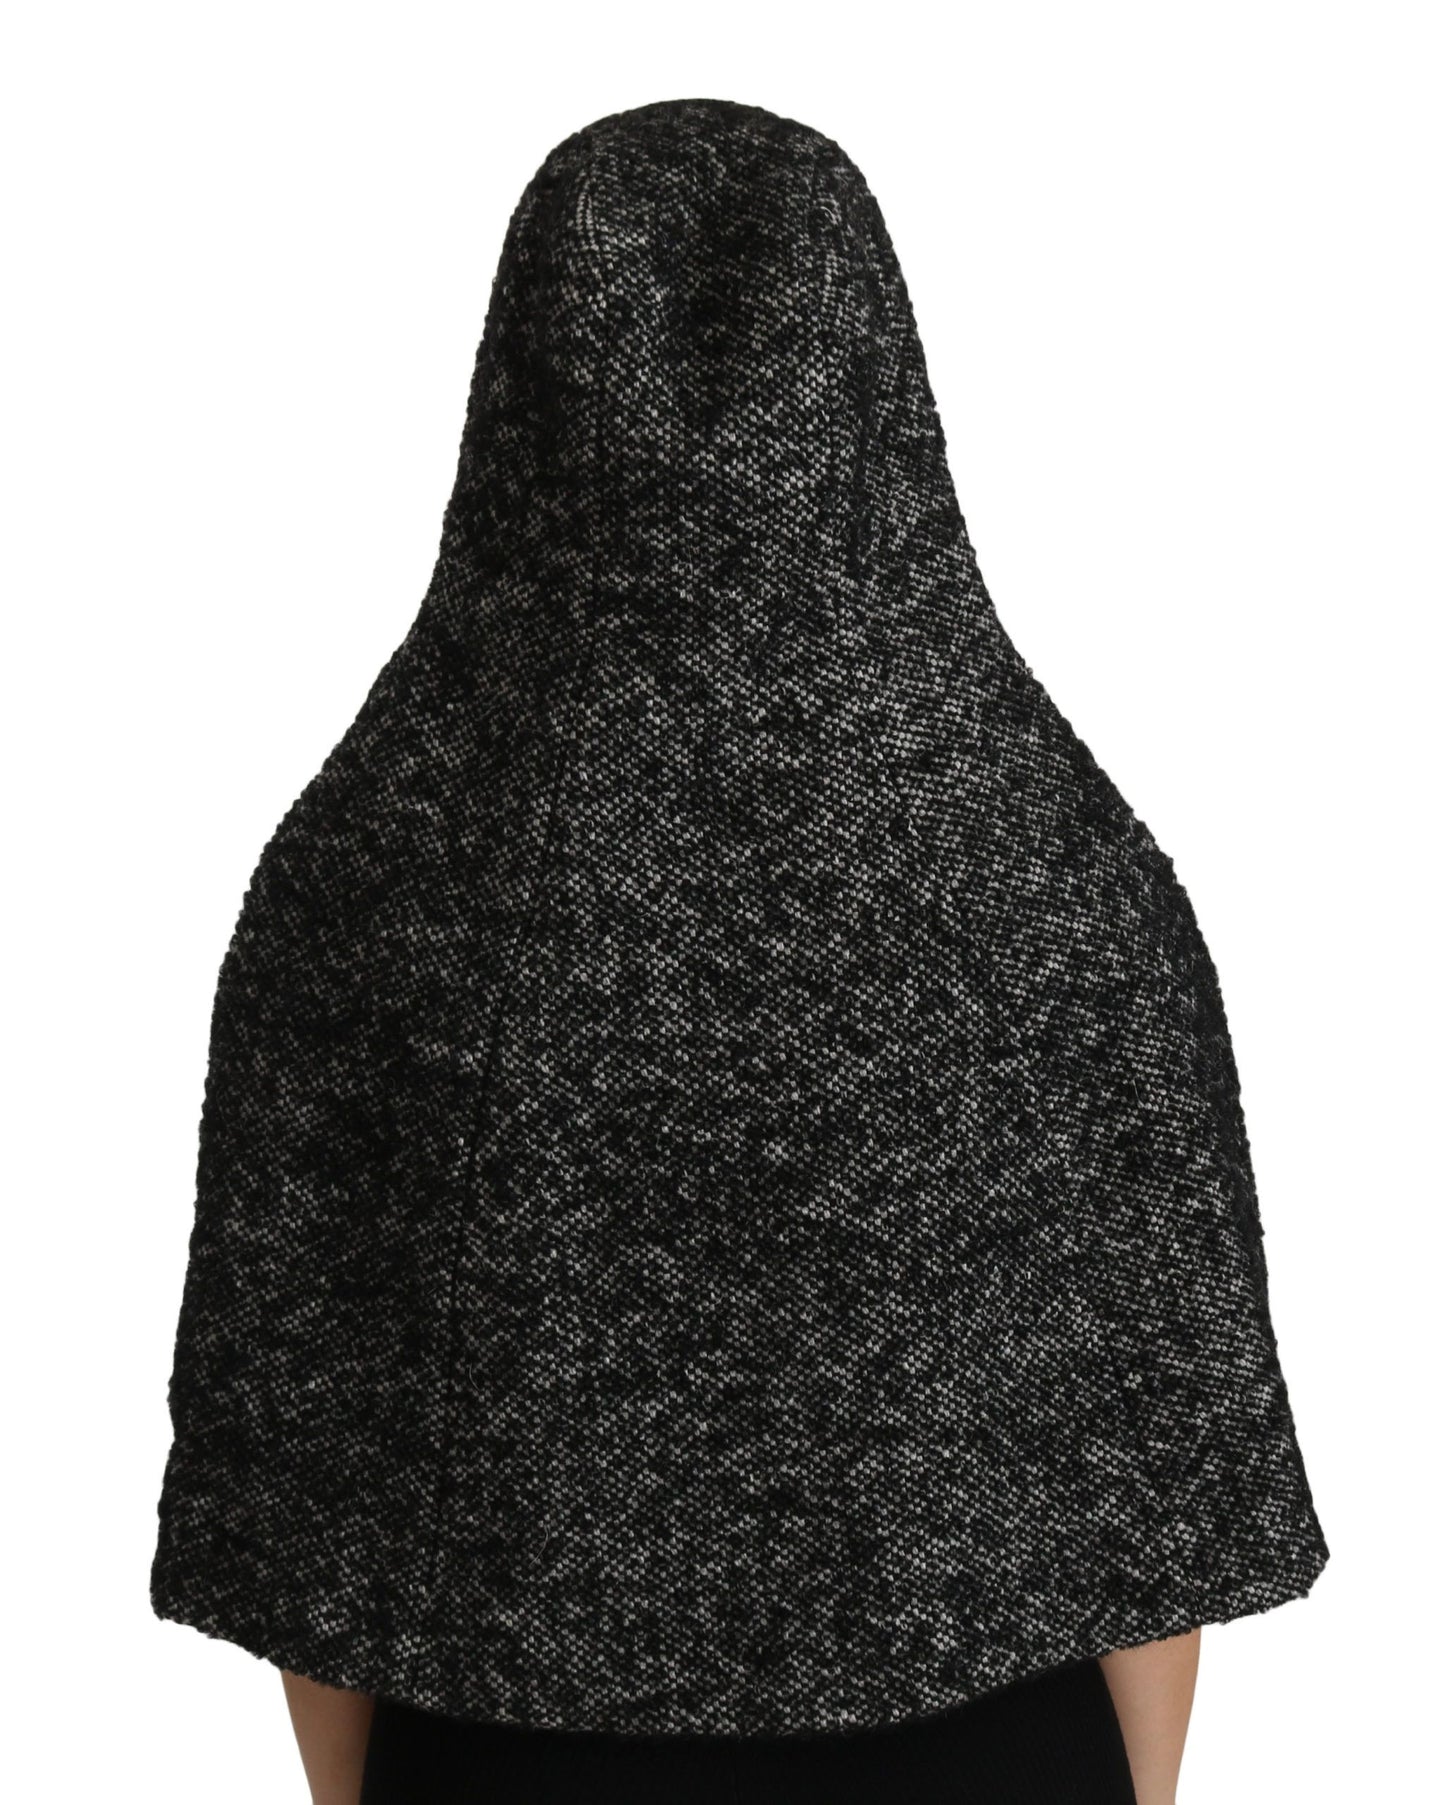 Elegant Gray Wool Hooded Scarf by Iconic Italian Label